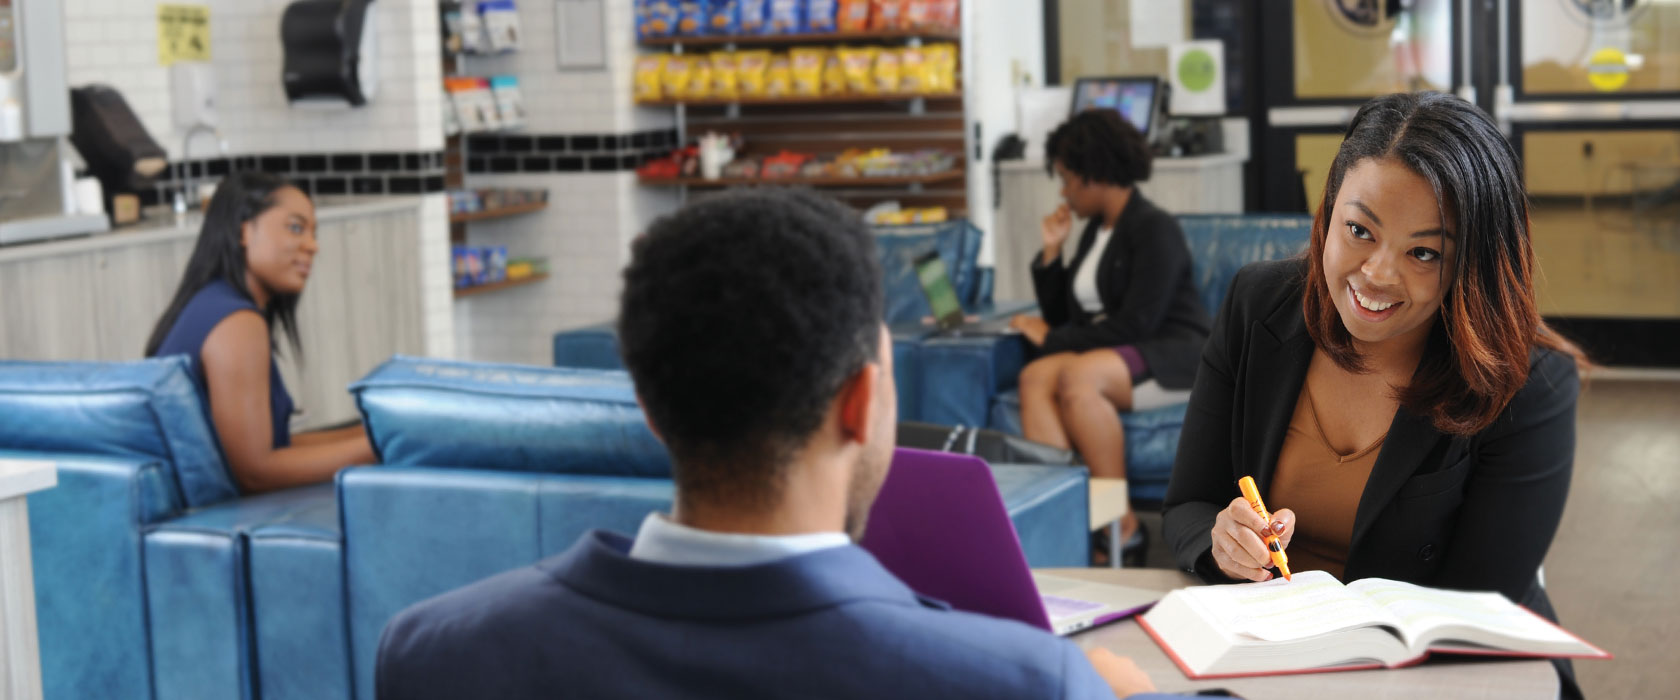 Students Studying in the Cafe